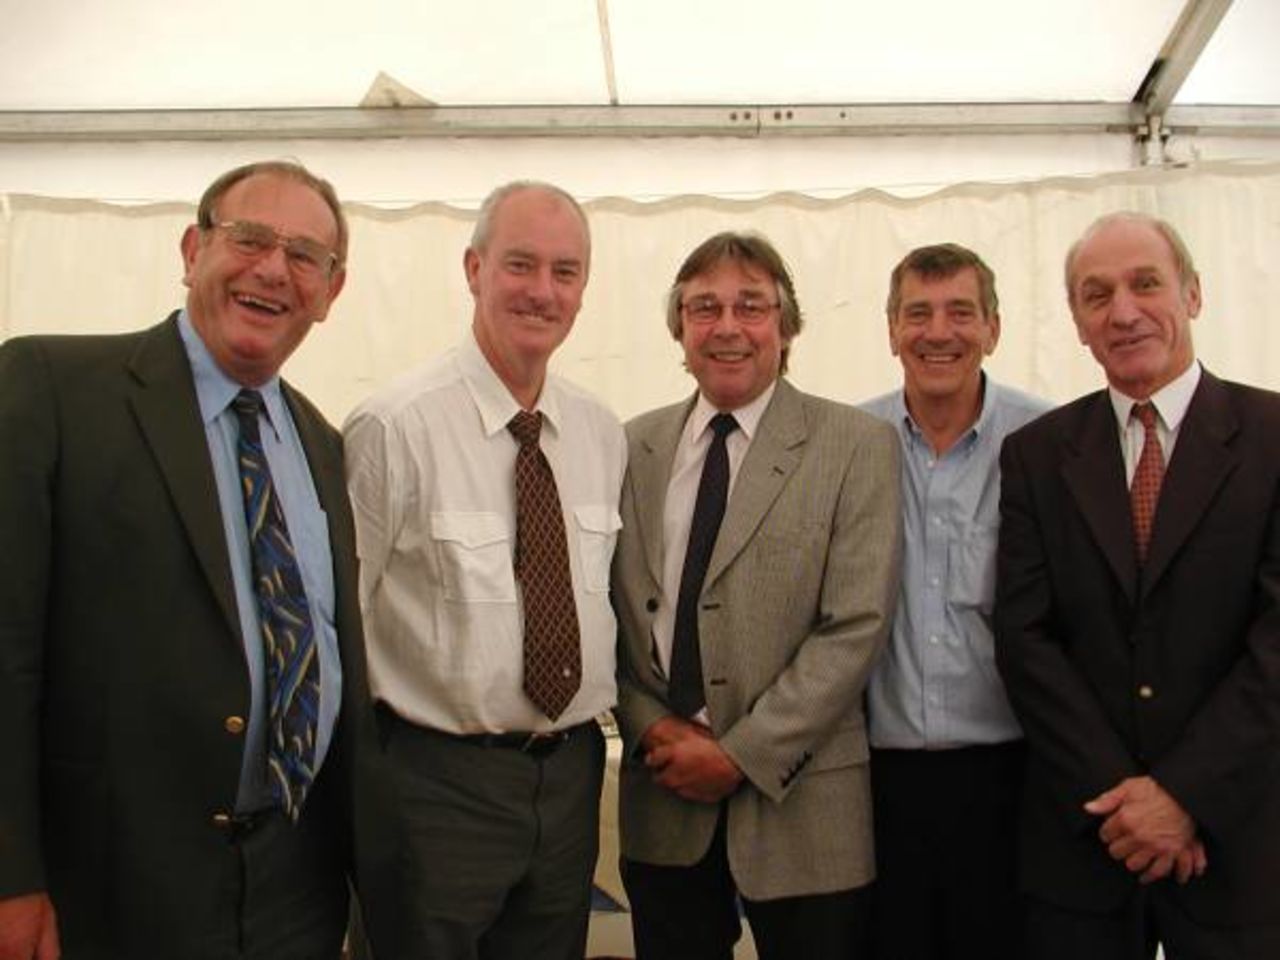 Butch White, Peter Haslop, Alan Castell, Colin Wilson (Club & Ground) and Bryan Timms at the reunion.